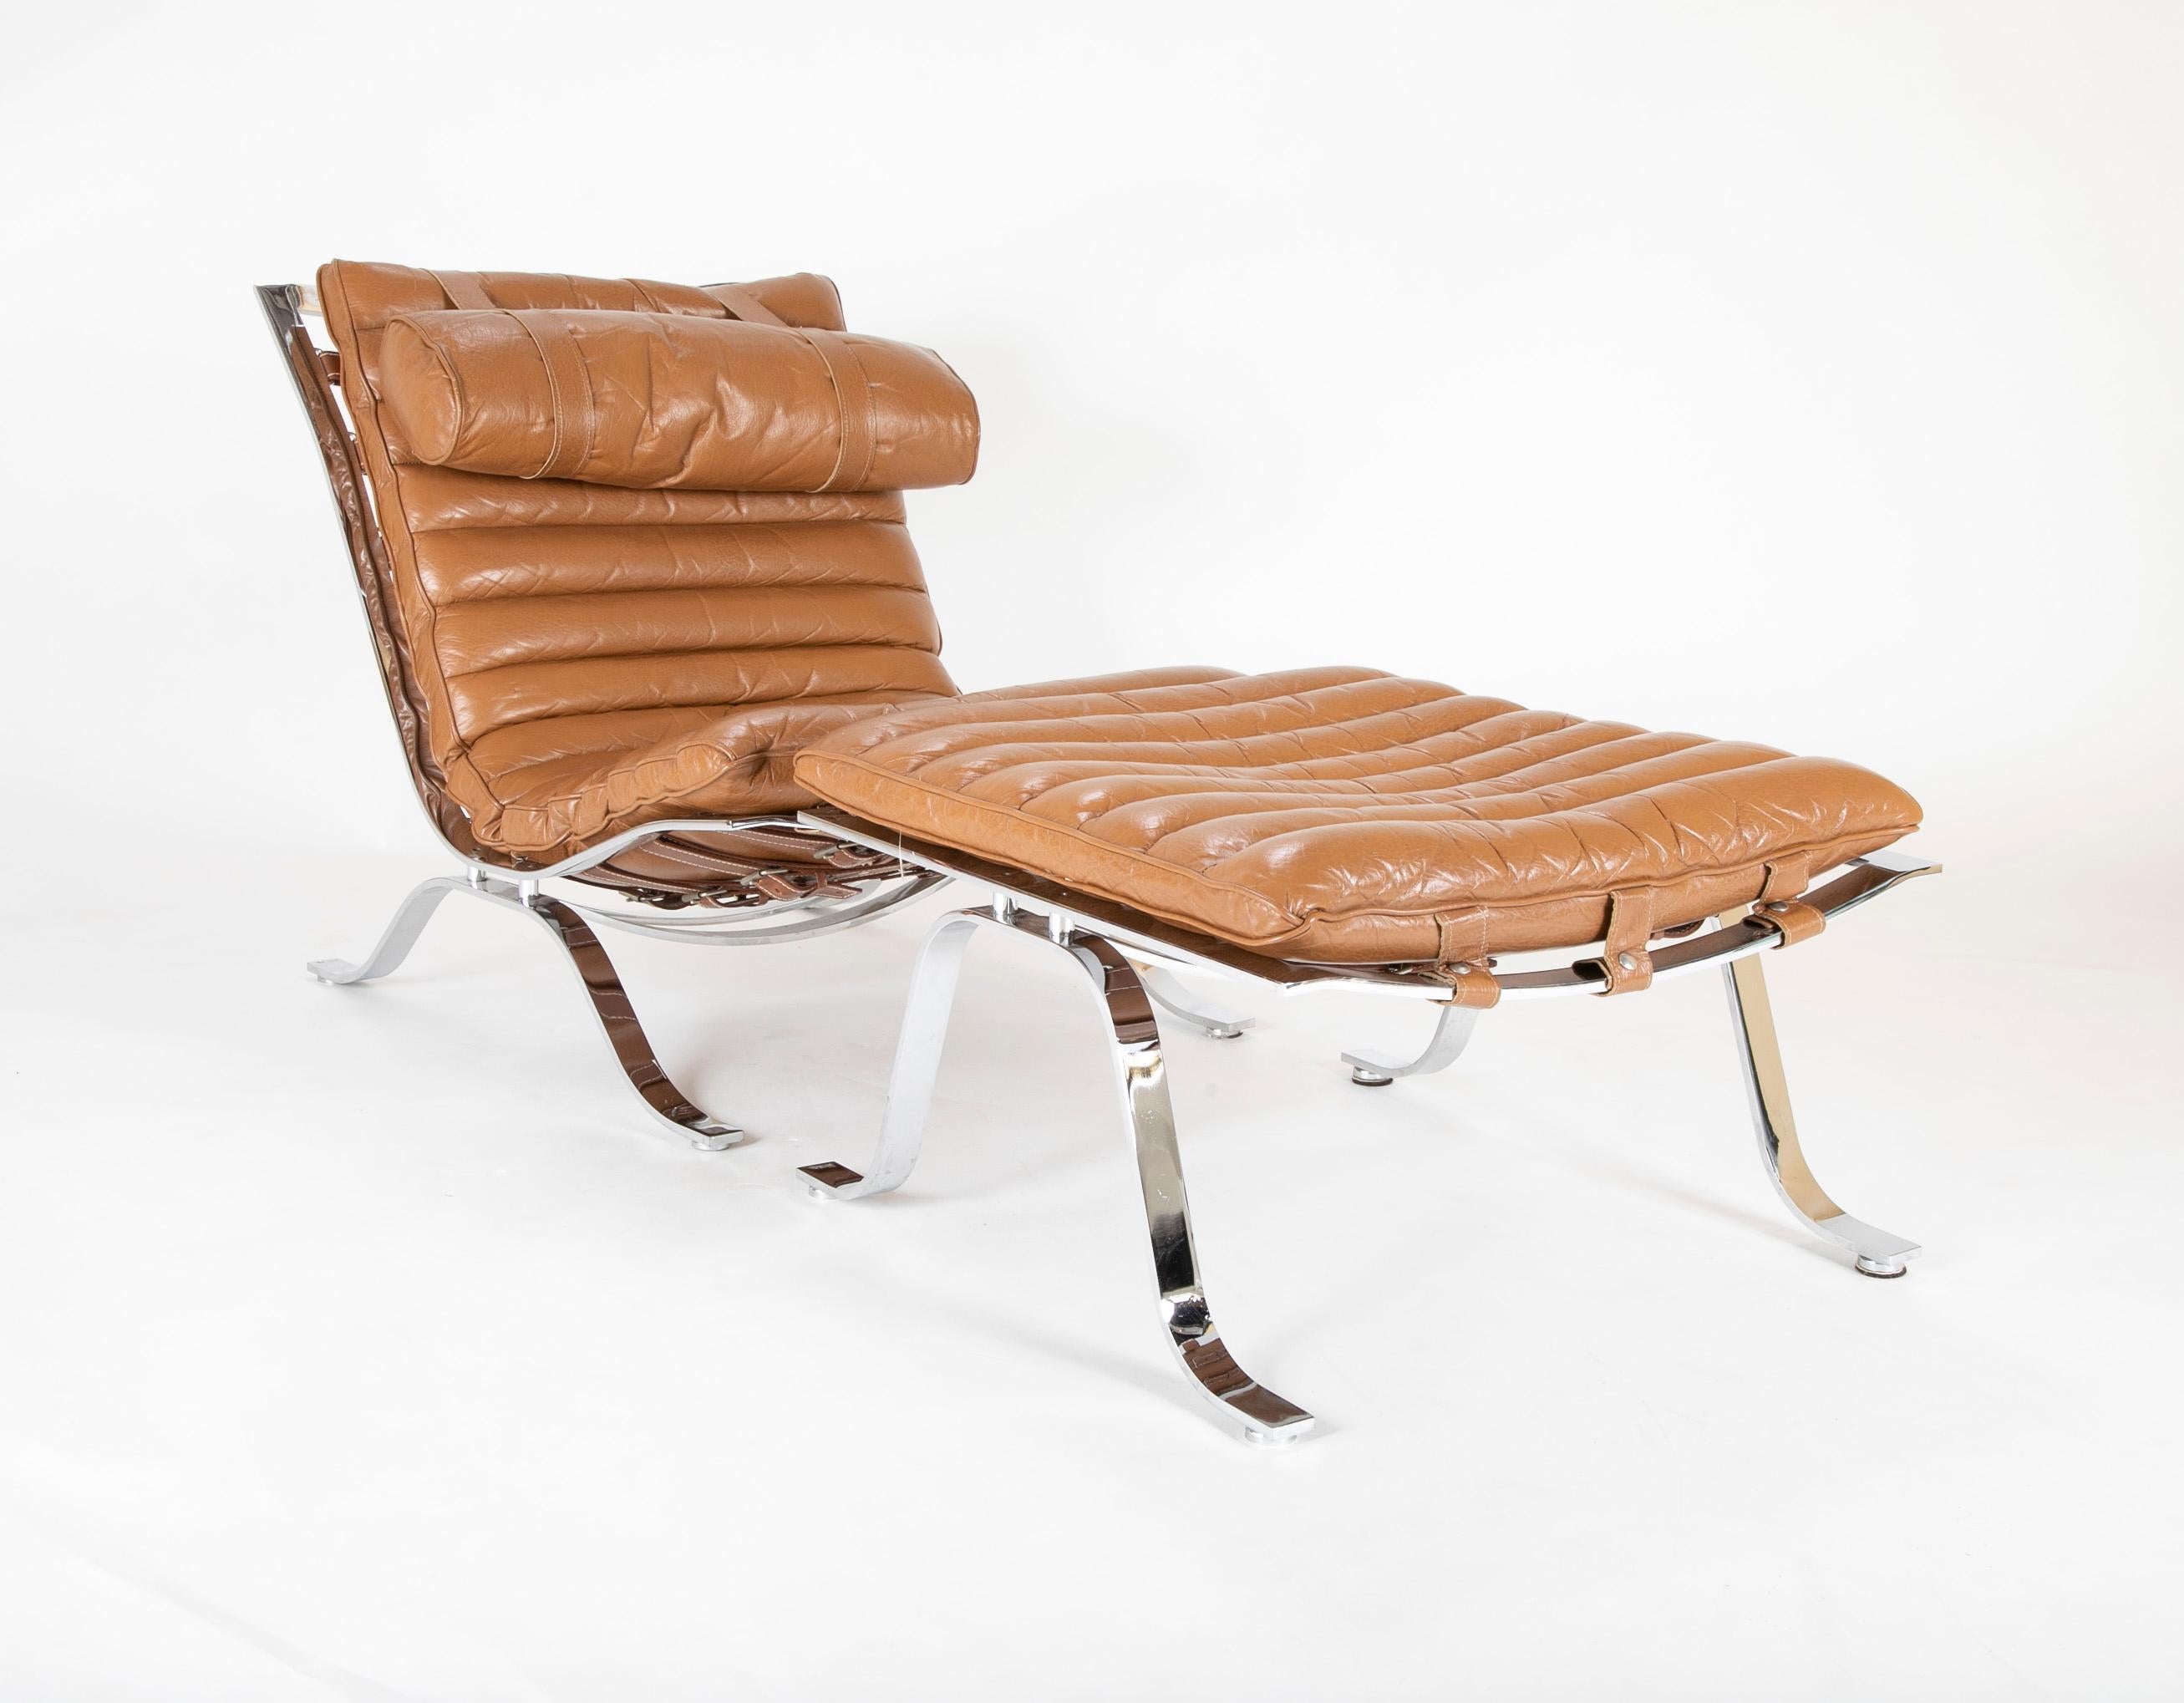 Chrome-plated steel and leather channeled cushion. Ari lounge chair with ottoman by Arne Norell,

circa 1966.